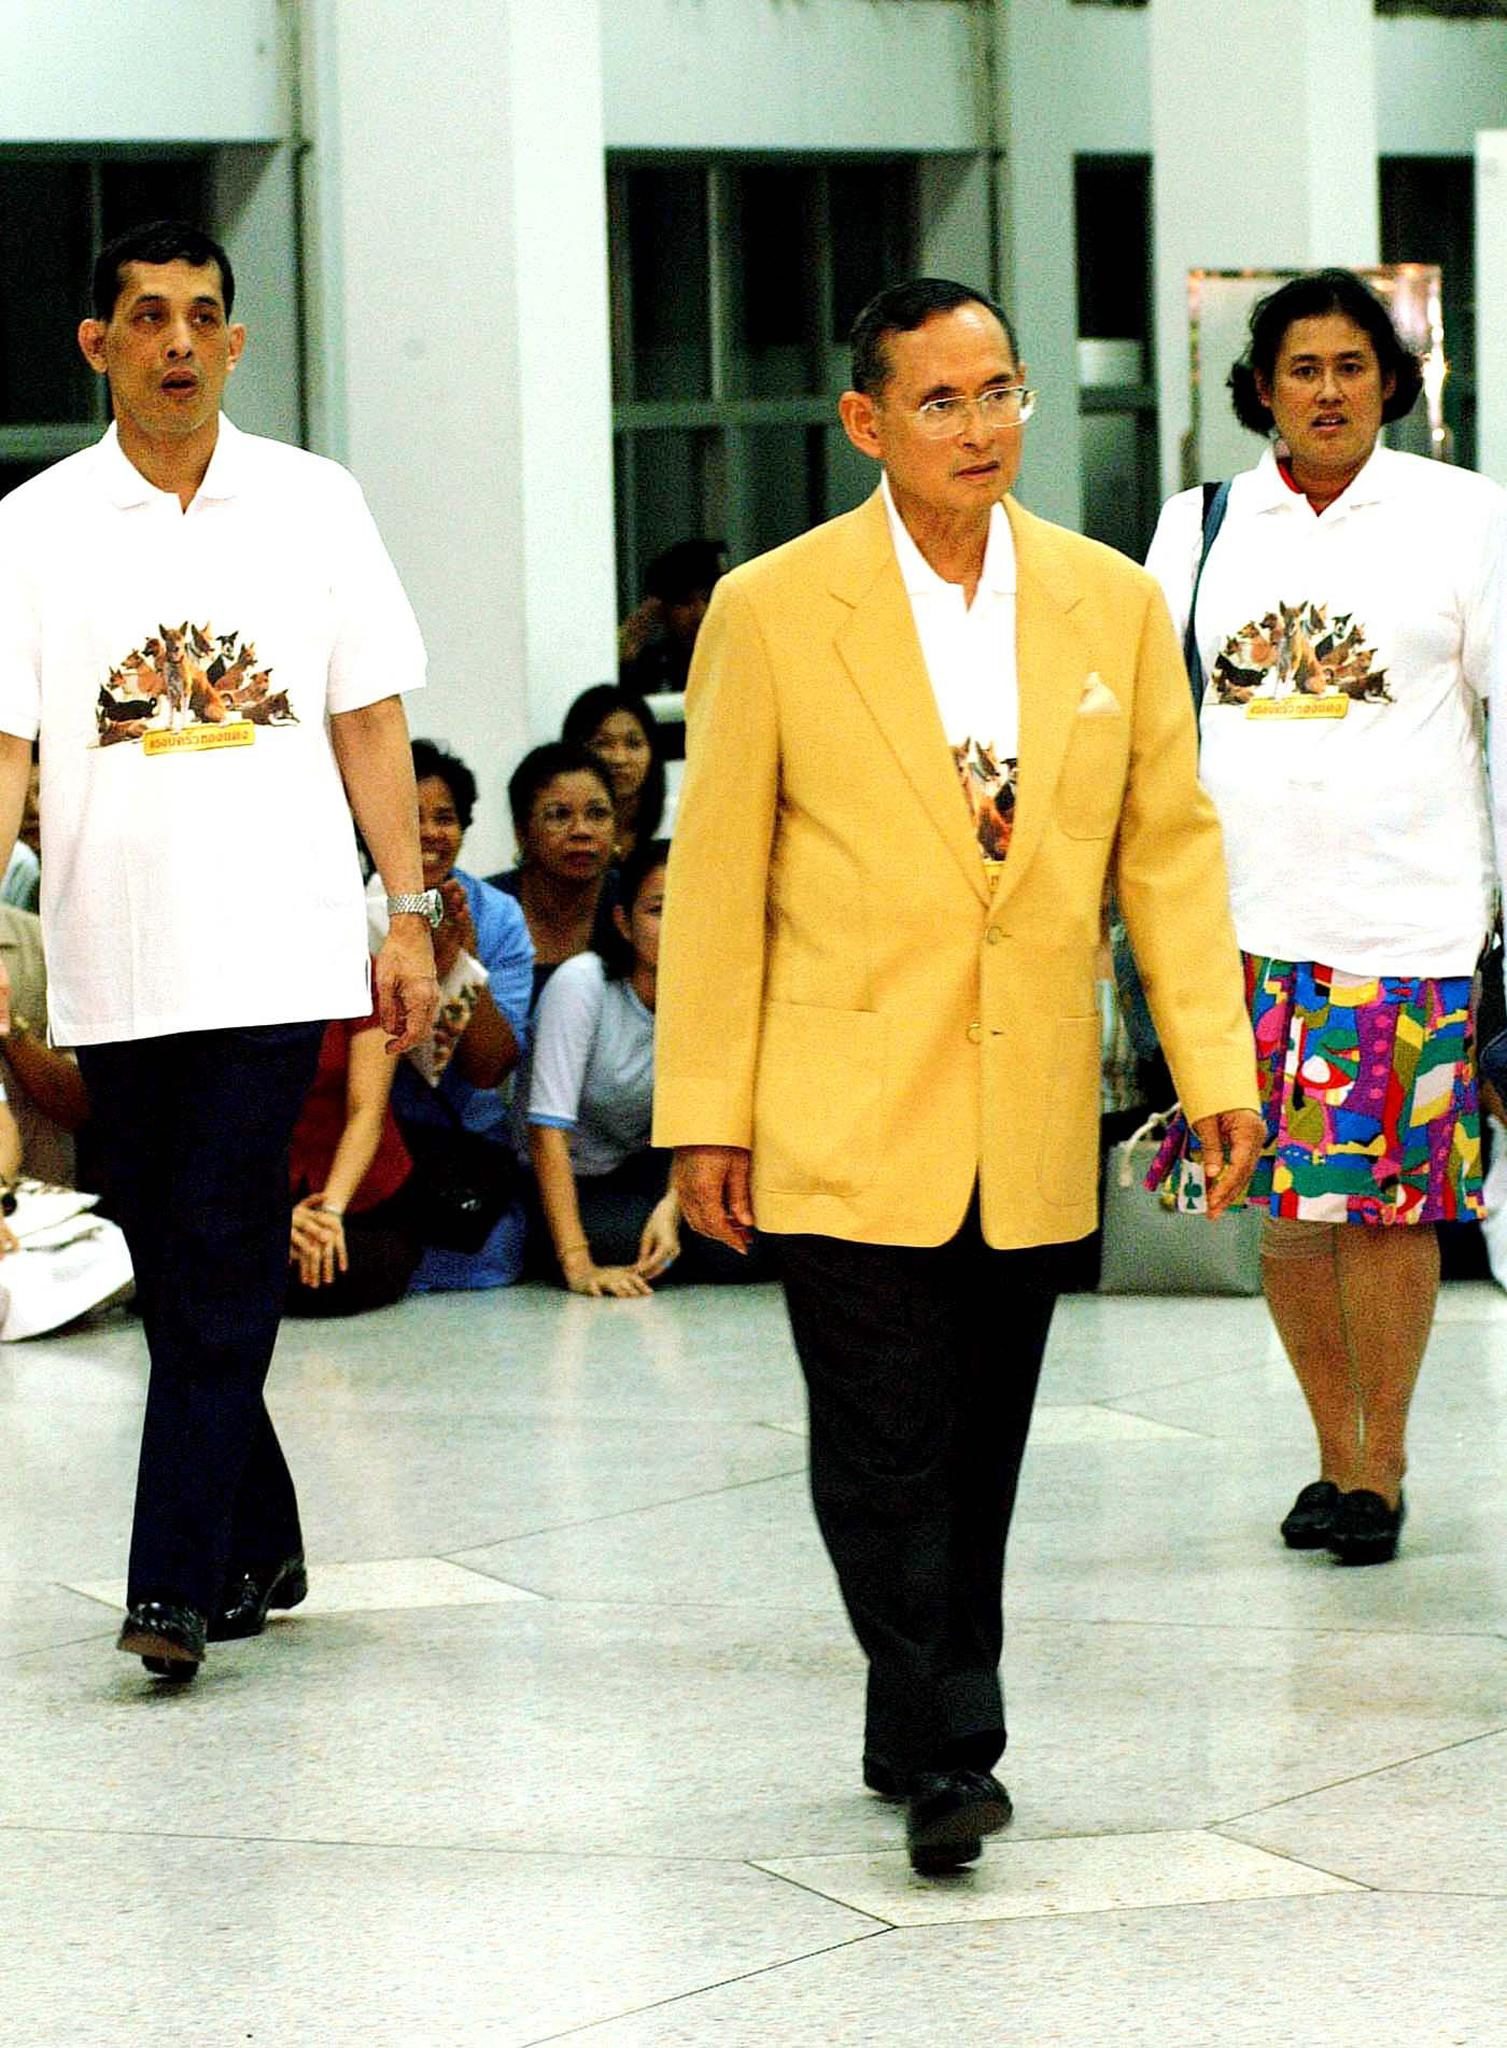 Thailand's King Bhumibol Adulyadej (C) leaves Siriraj Hospital 07 February 2002, flanked by Prince Maha Vajiralongkorn (L) and Princess Maha Chakri Sirindorn, after successfully undergoing prostrate surgery.  The three Royals wore t-shirts printed with a photo, taken by the King himself, of Thongdaeng, the King's dog, and the dog's "family."  The Royal Household has been selling the t-shirt to raise funds for the Bangkok Animal Hosipital.   Thailand's hottest new fashion item -- a T-shirt featuring a stray dog adopted by much-loved King Bhumibol Adulyadej -- has leapt off the shelves after the monarch was pictured wearing one.   AFP PHOTO / AFP PHOTO / STR